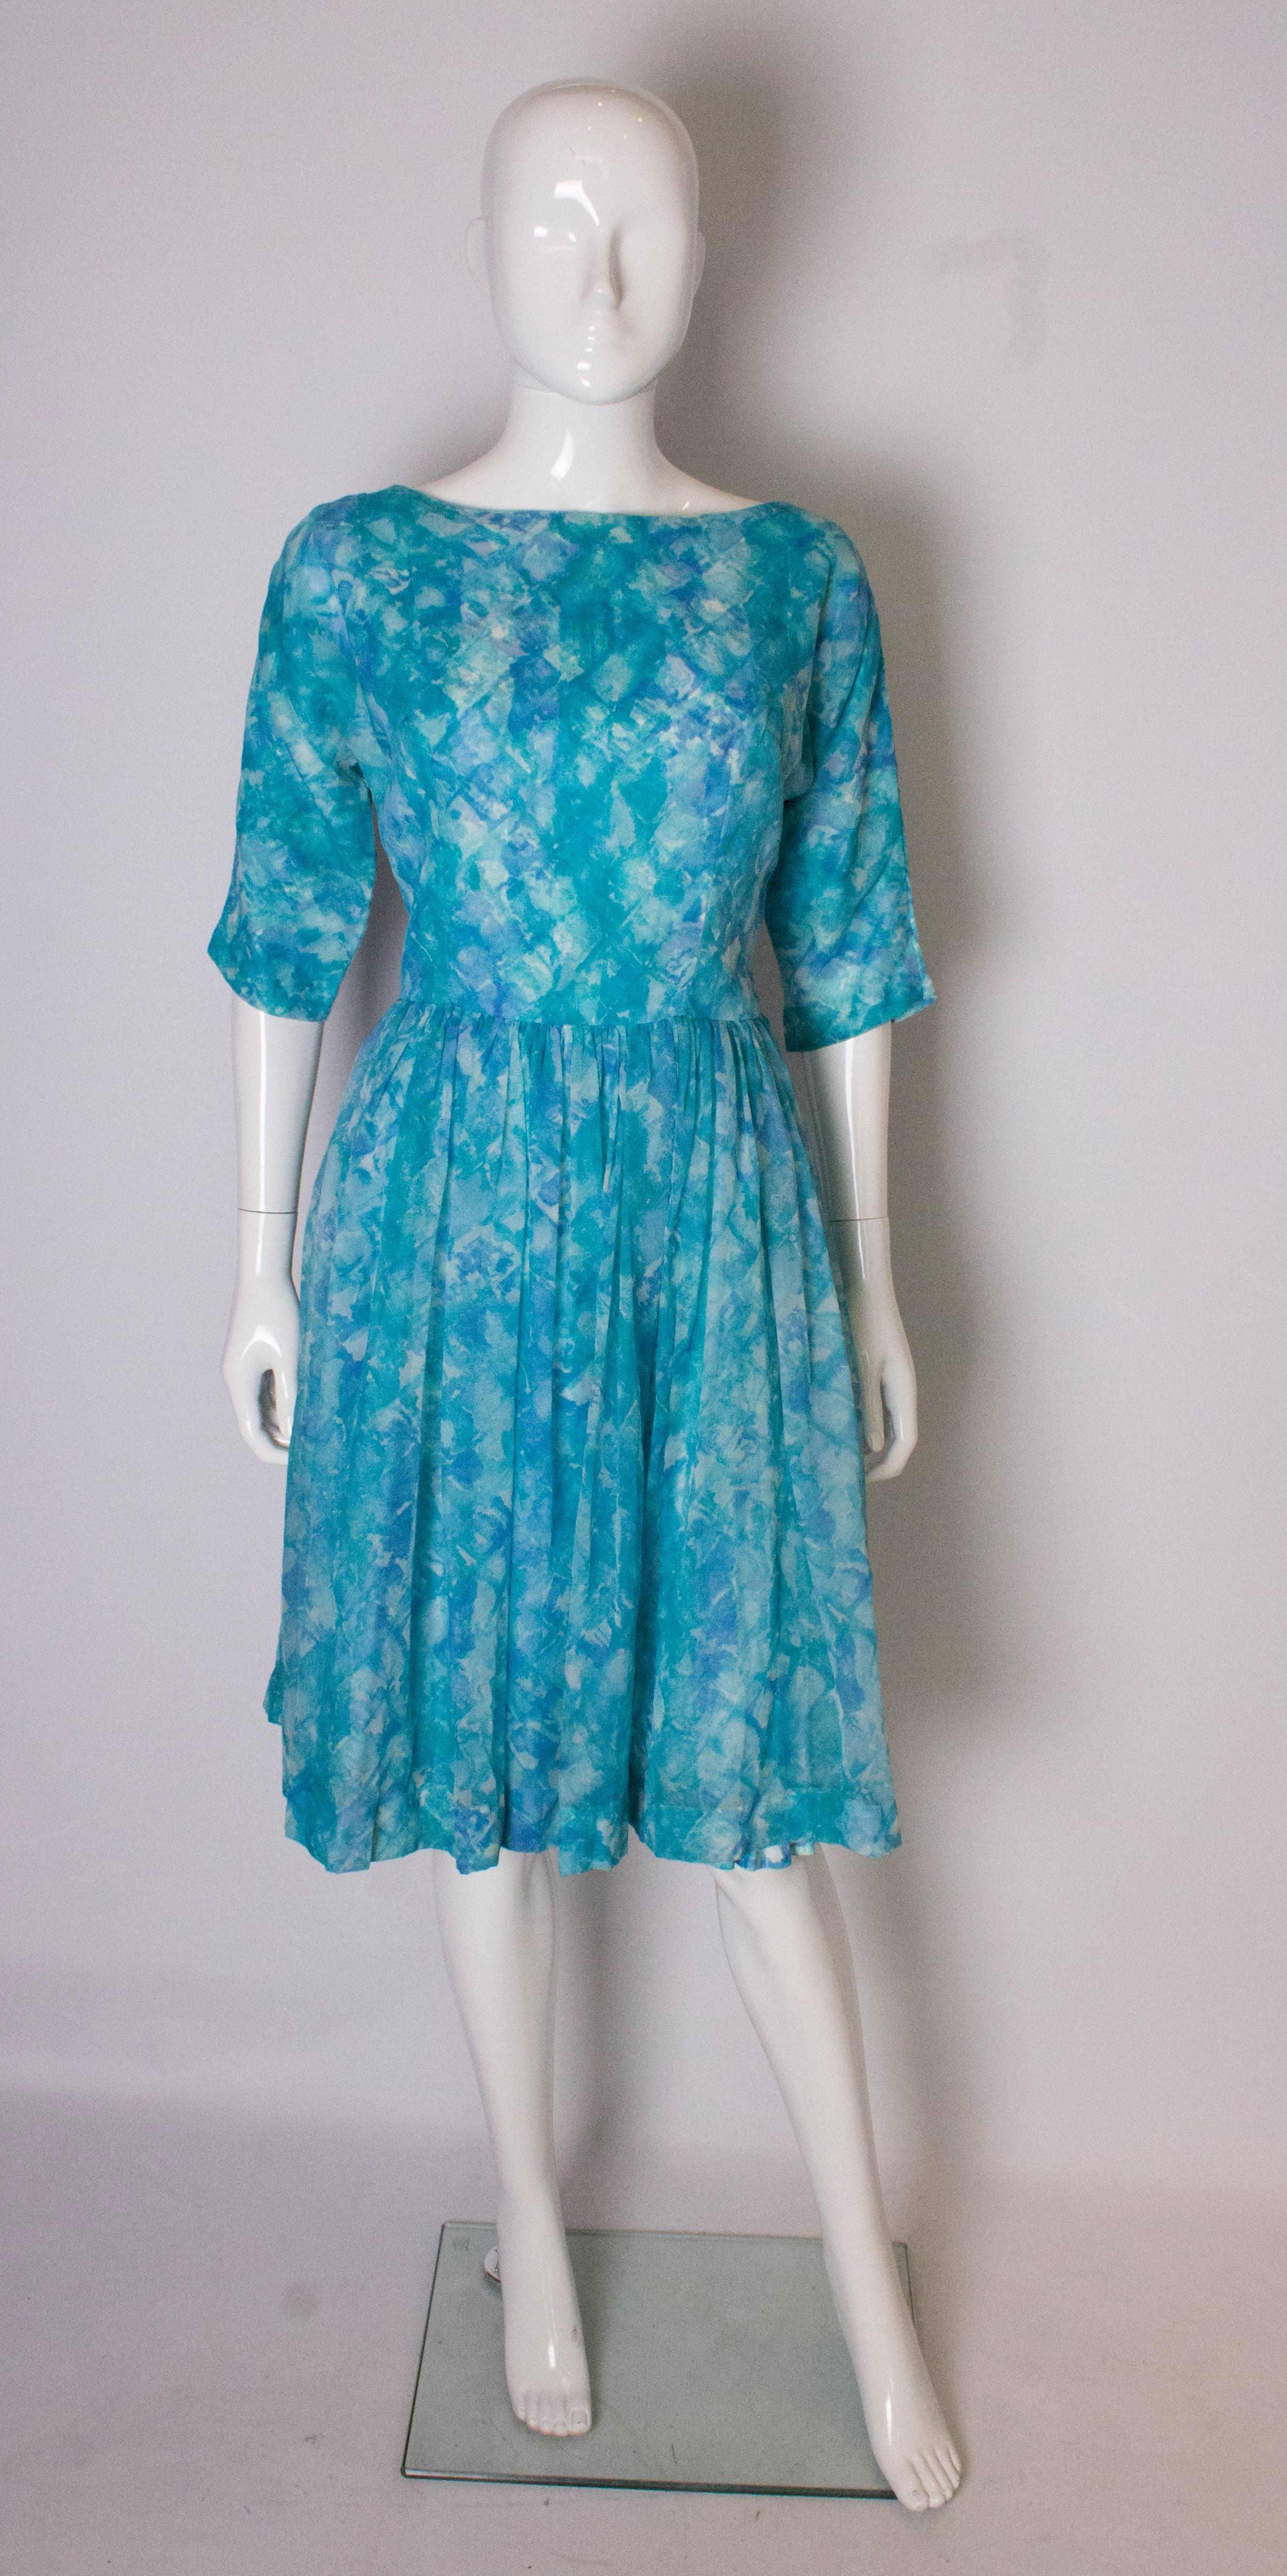 A great, classic swing cinch cocktail  dress in multiple shades on blue. The dress has a printed underskirt in the same print as the over skirt, and  has a back central zip, elbow length sleaves, and belt hoops.